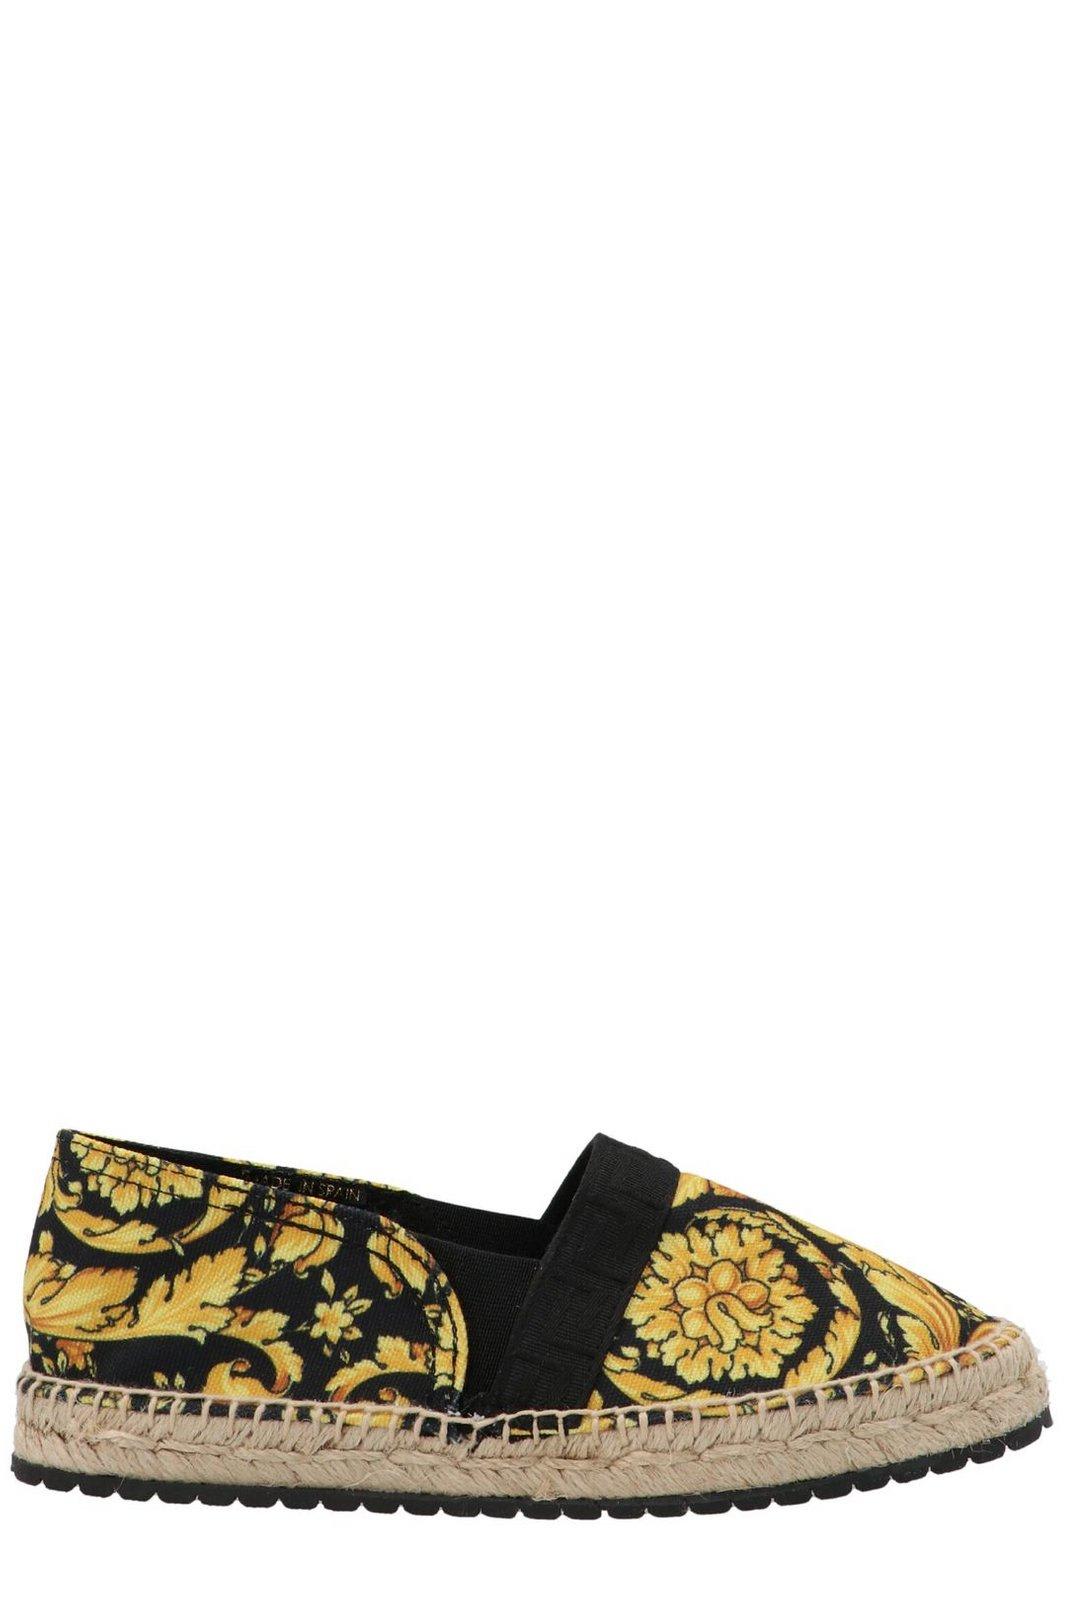 Young Versace Barocco Printed Slip-on Espadrilles